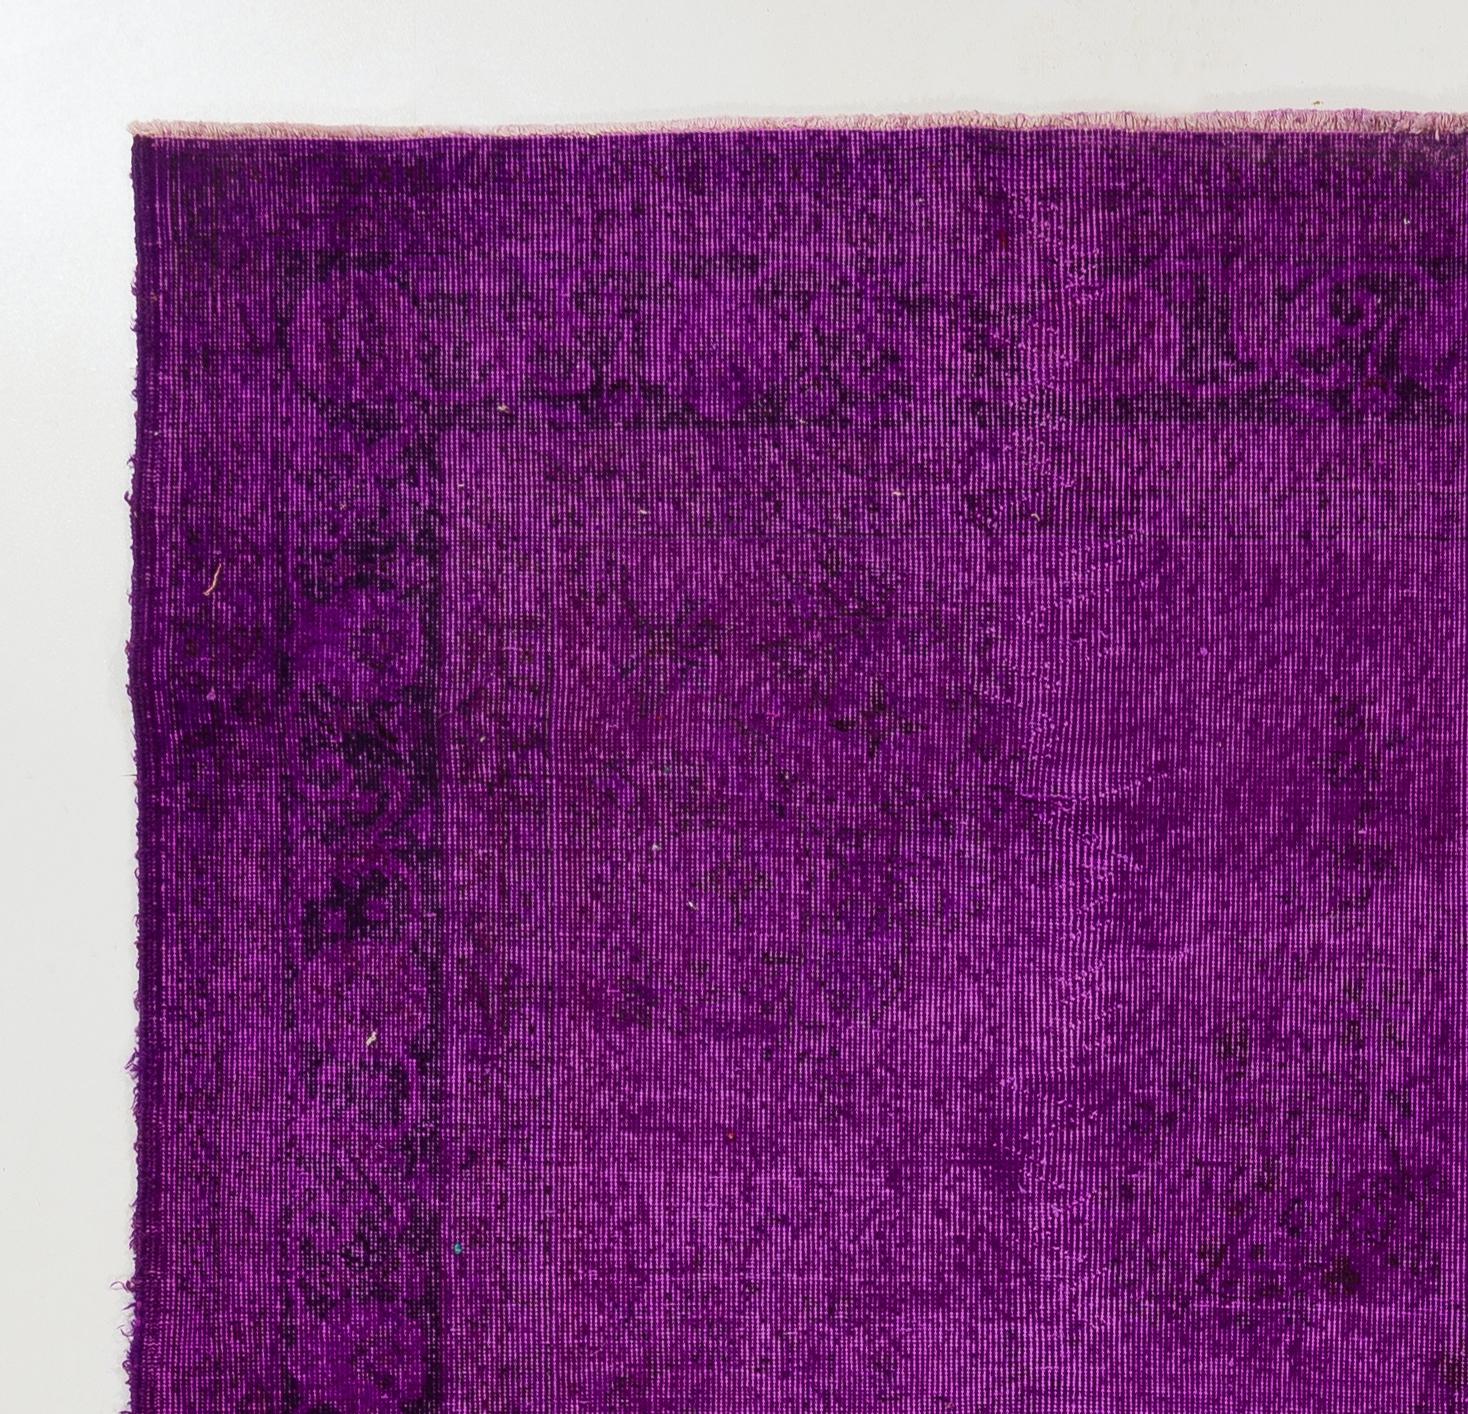 A vintage Turkish area rug re-dyed in purple color for contemporary interiors.
Finely hand knotted, low wool pile on cotton foundation. Professionally washed.
Sturdy and can be used on a high traffic area, suitable for both residential and